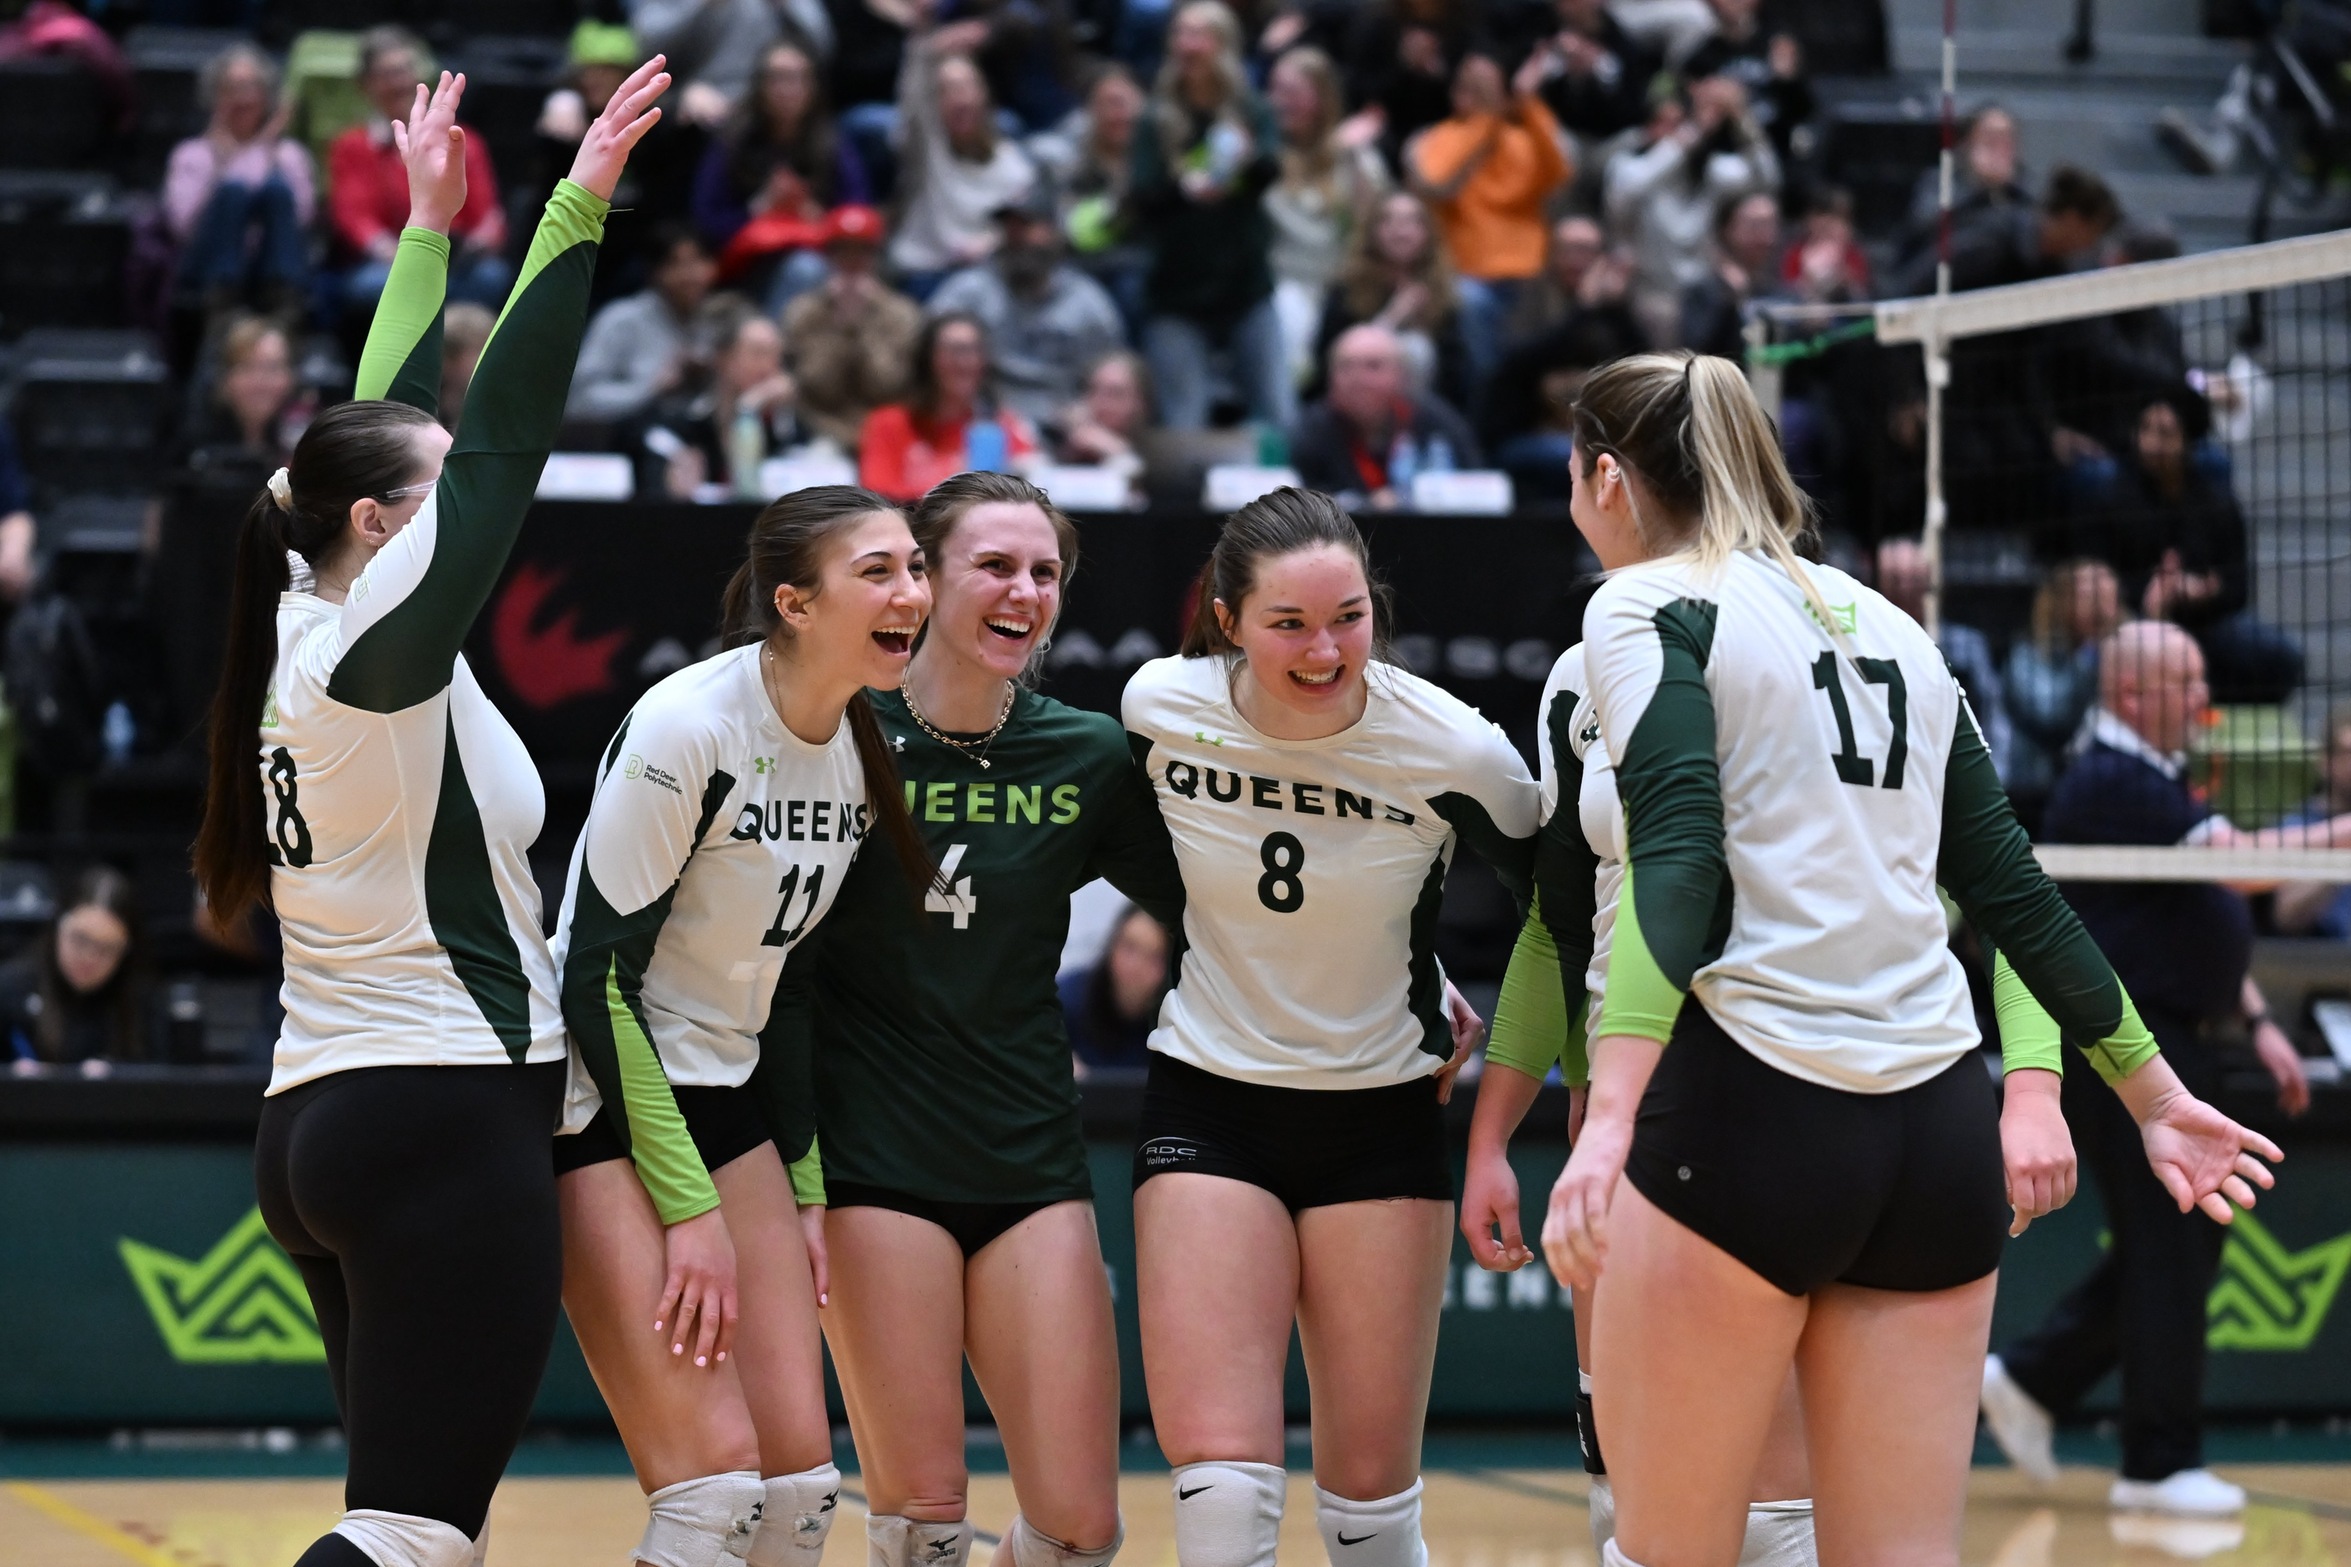 Finalists determined on day two at CCAA Women’s Volleyball Championship